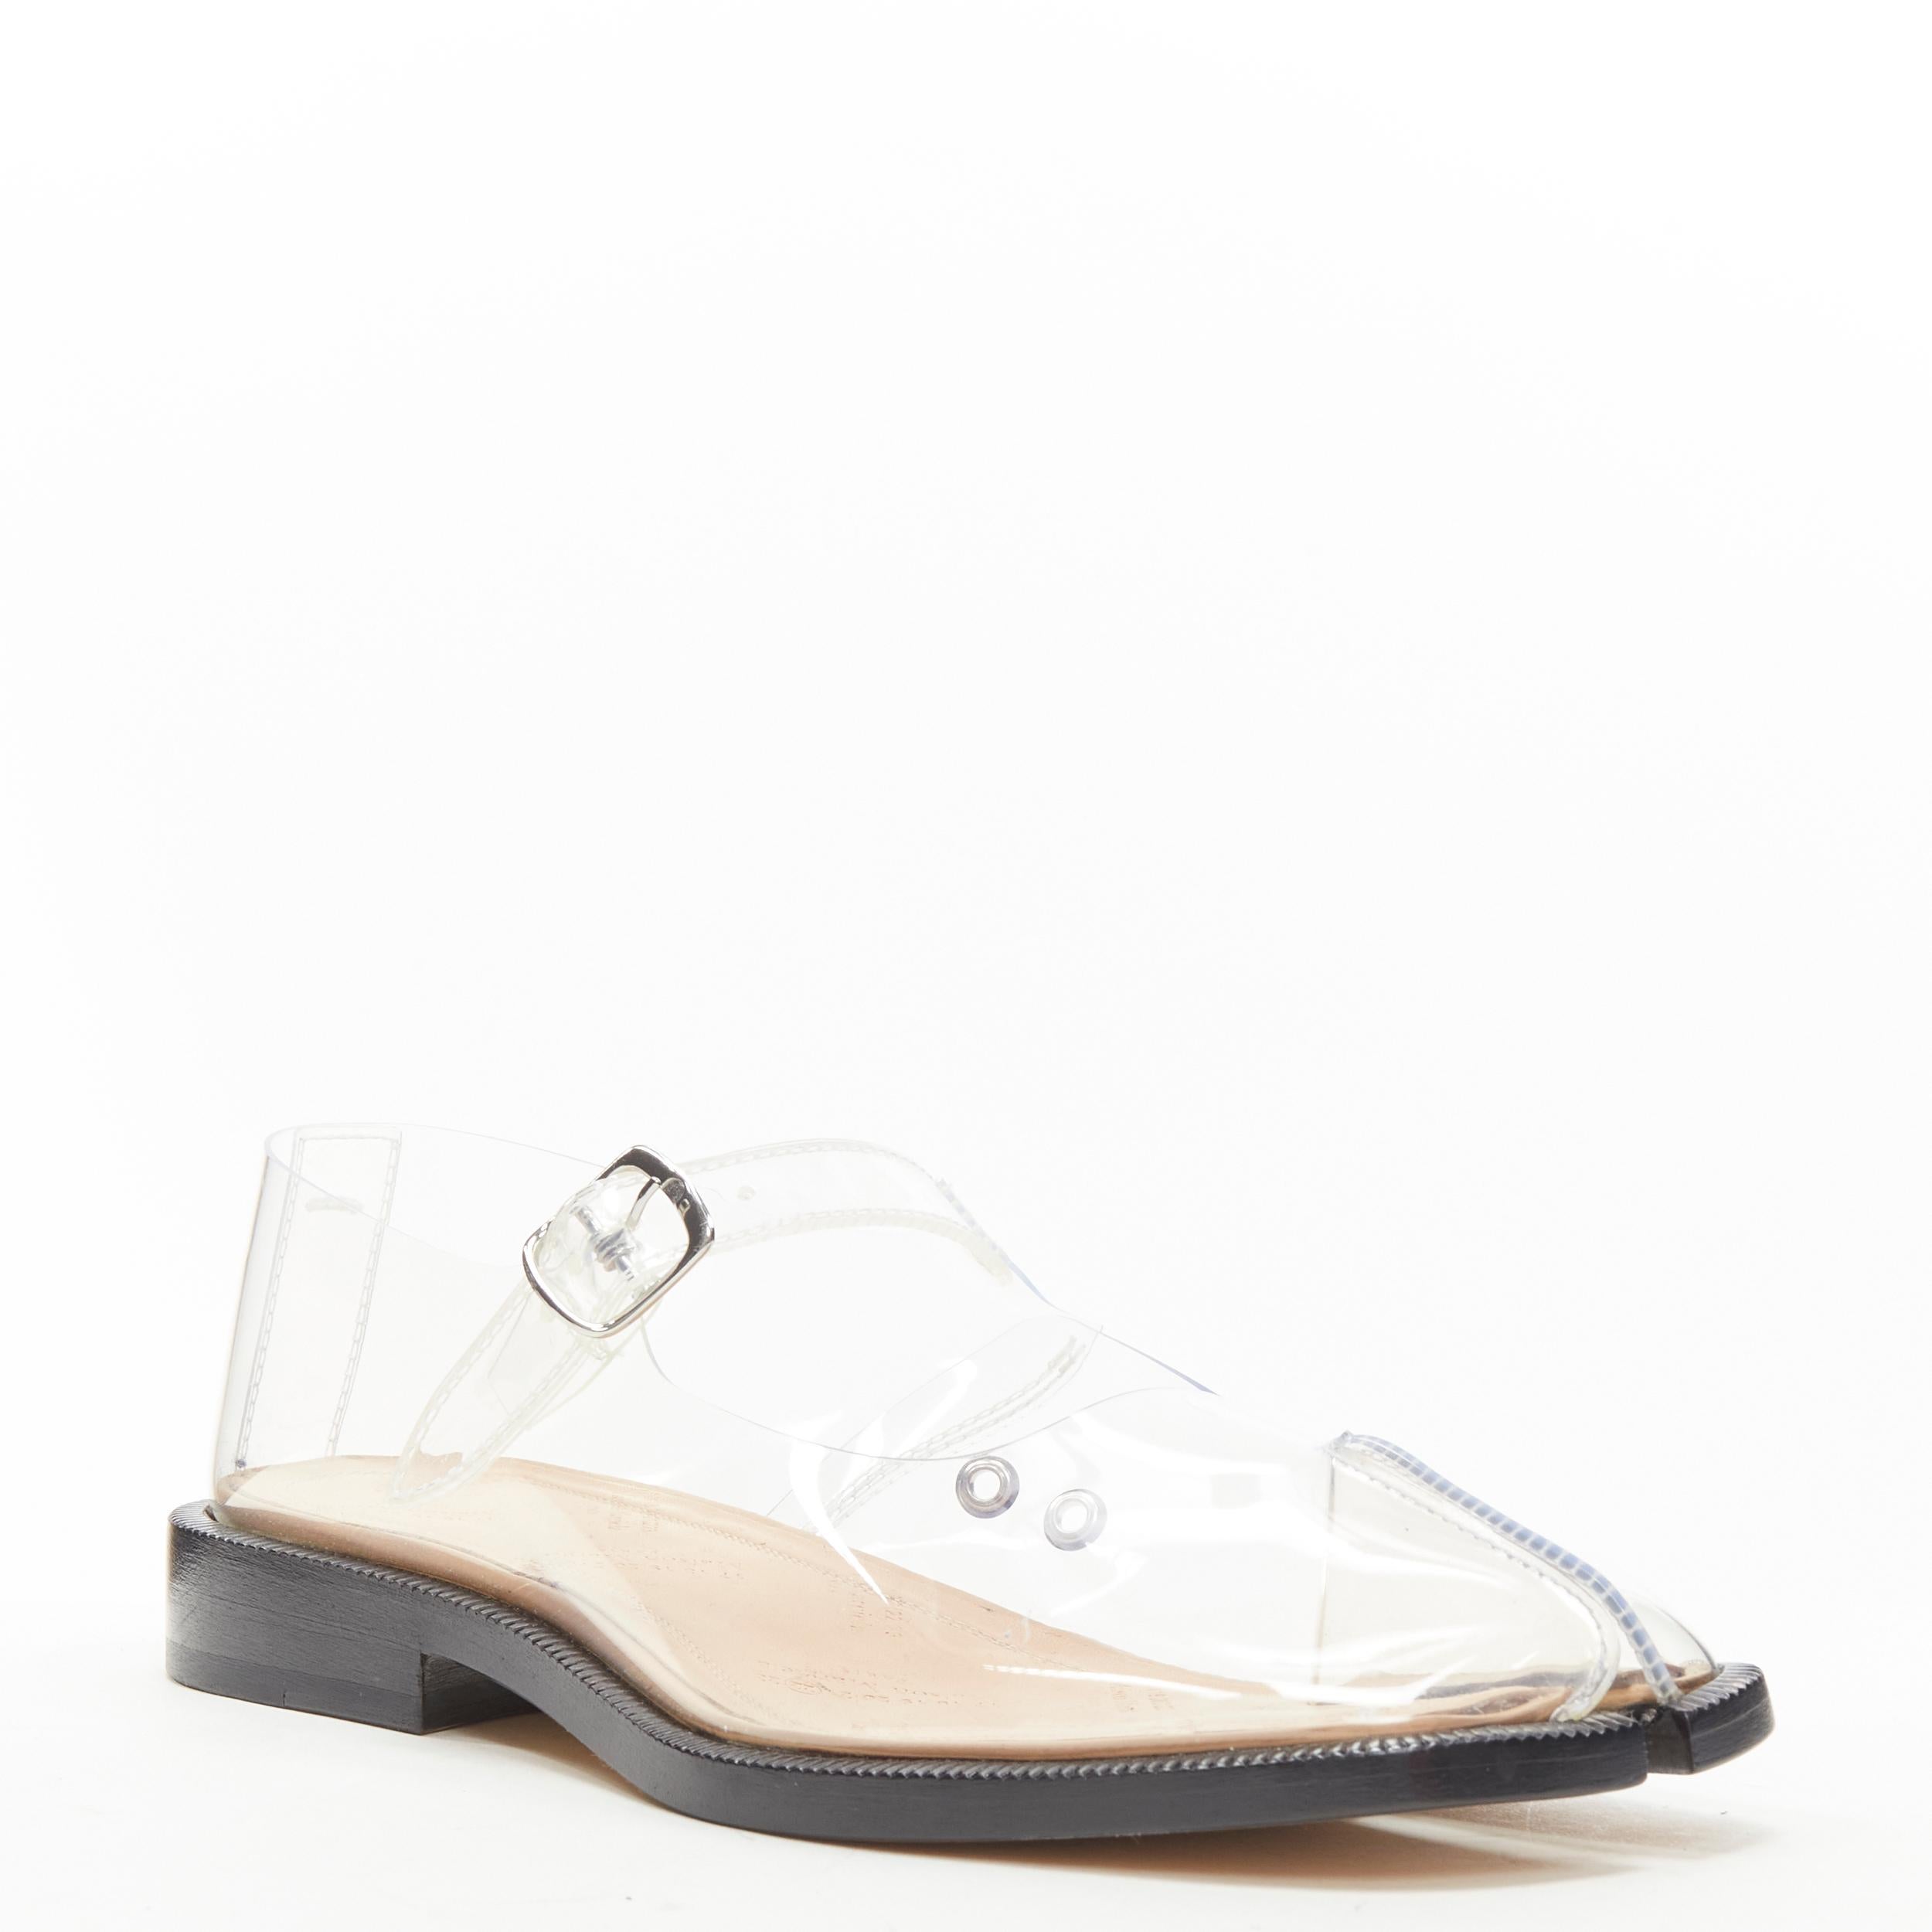 new MAISON MARGIELA Tabi PVC transparent clear mary jane flats EU38 
Reference: TGAS/C00638 
Brand: Maison Margiela 
Designer: John Galliano 
Model: Tabi 
Material: Plastic 
Color: Clear 
Pattern: Solid 
Closure: Ankle Strap 
Extra Detail: PVC